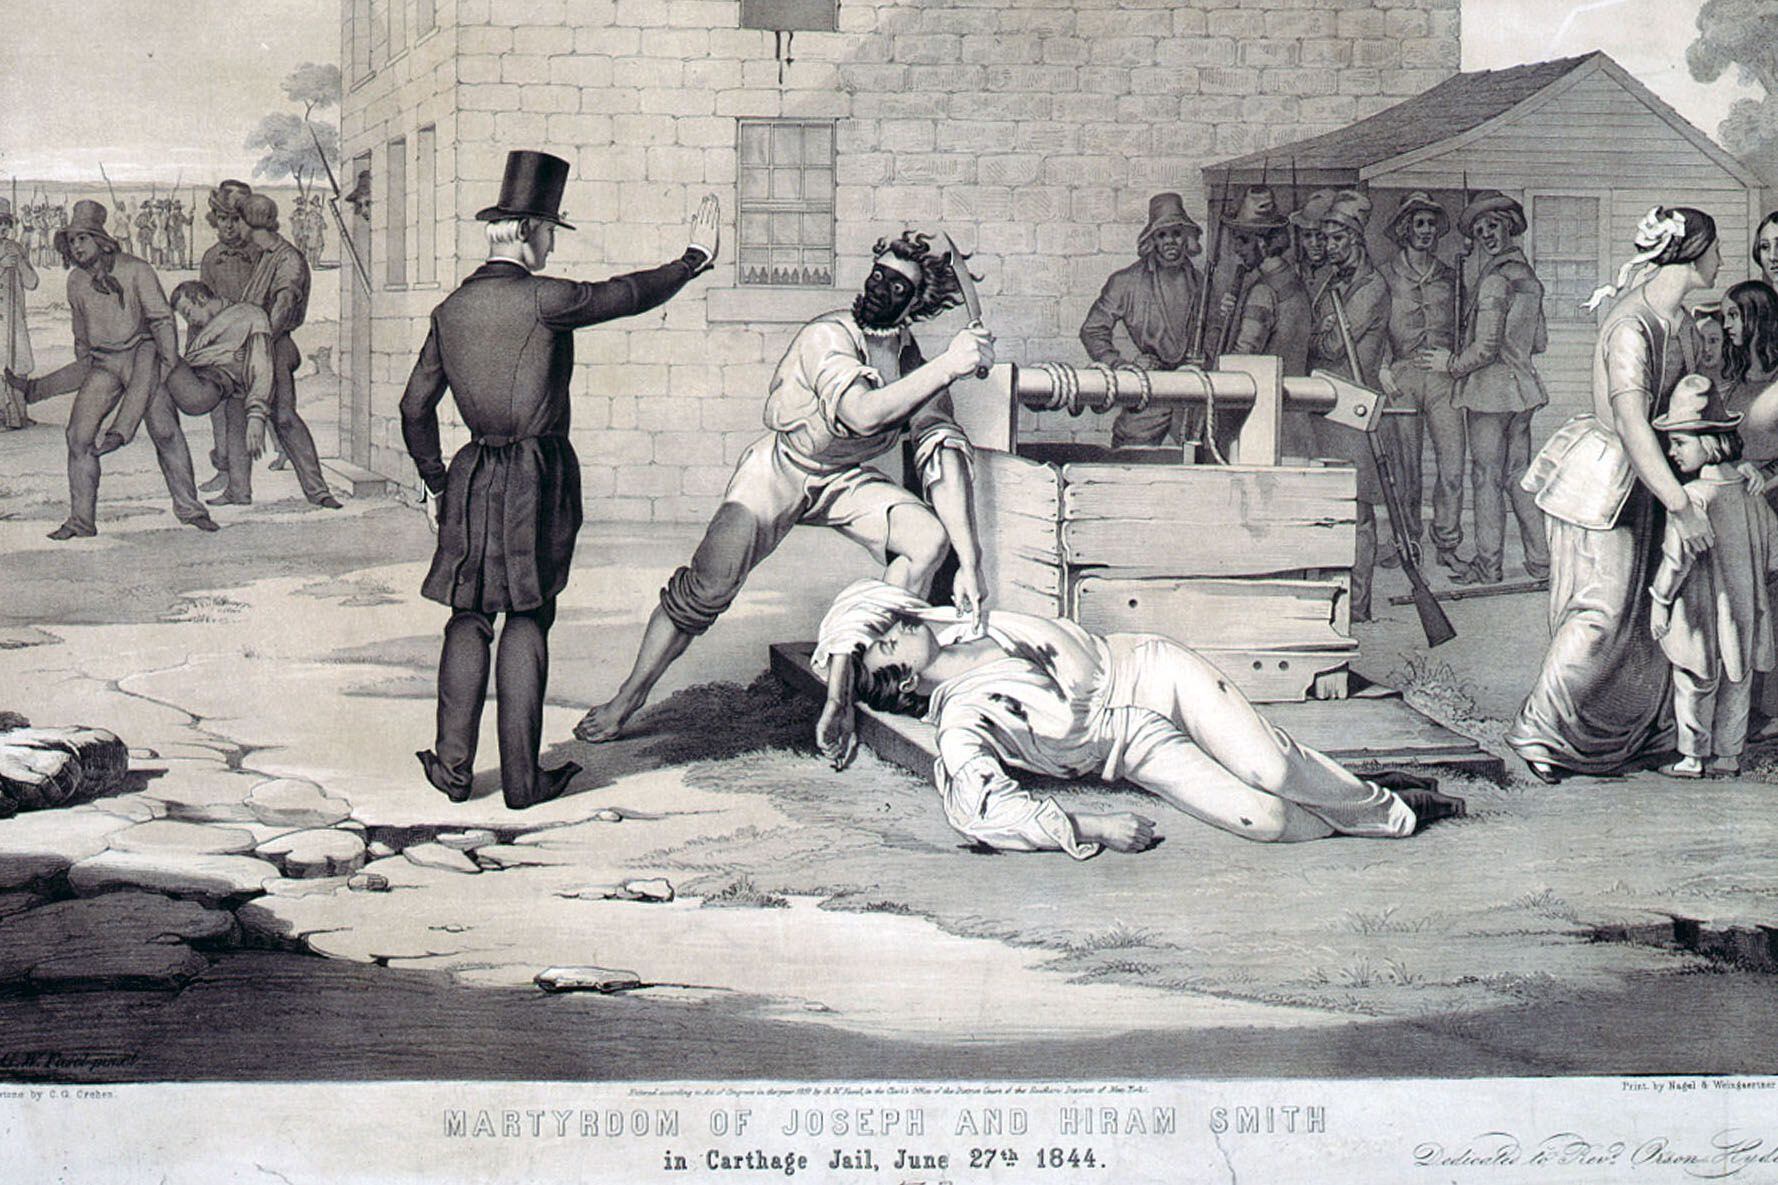 (The Library of Congress) The slaying of Joseph and Hyrum Smith is depicted in this lithograph by artist C.G. Crehen. A new online volume details the 1845 trial of the accused assassins.